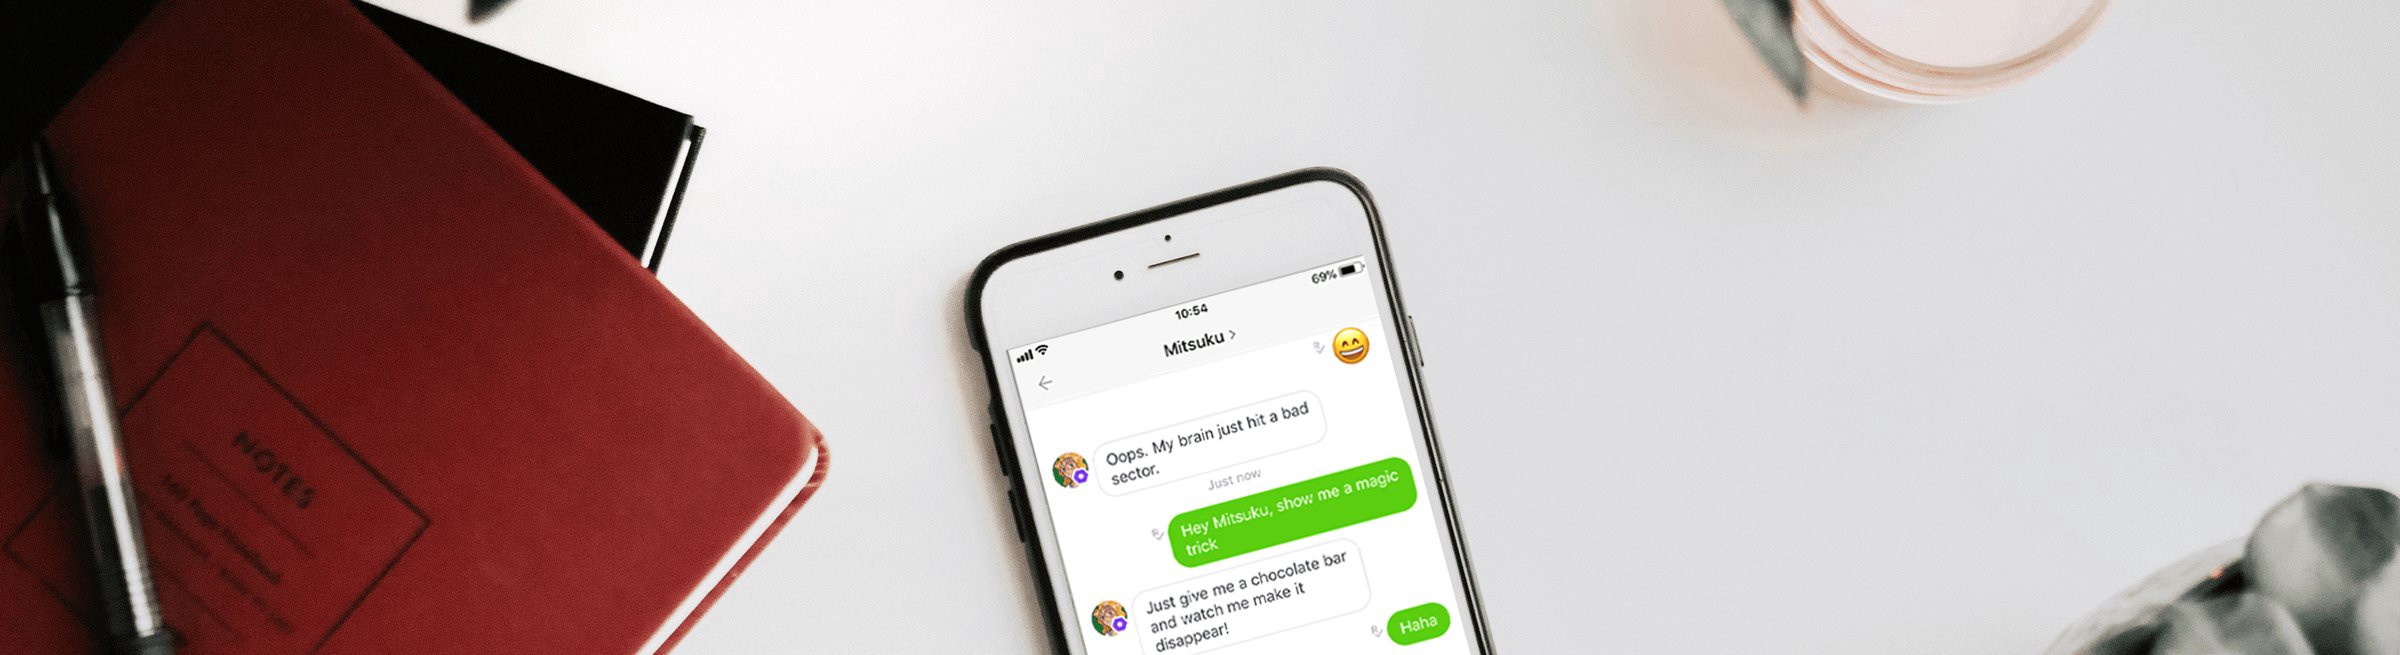 Types Of Chatbots And How They Help Businesses By - oops qq roblox